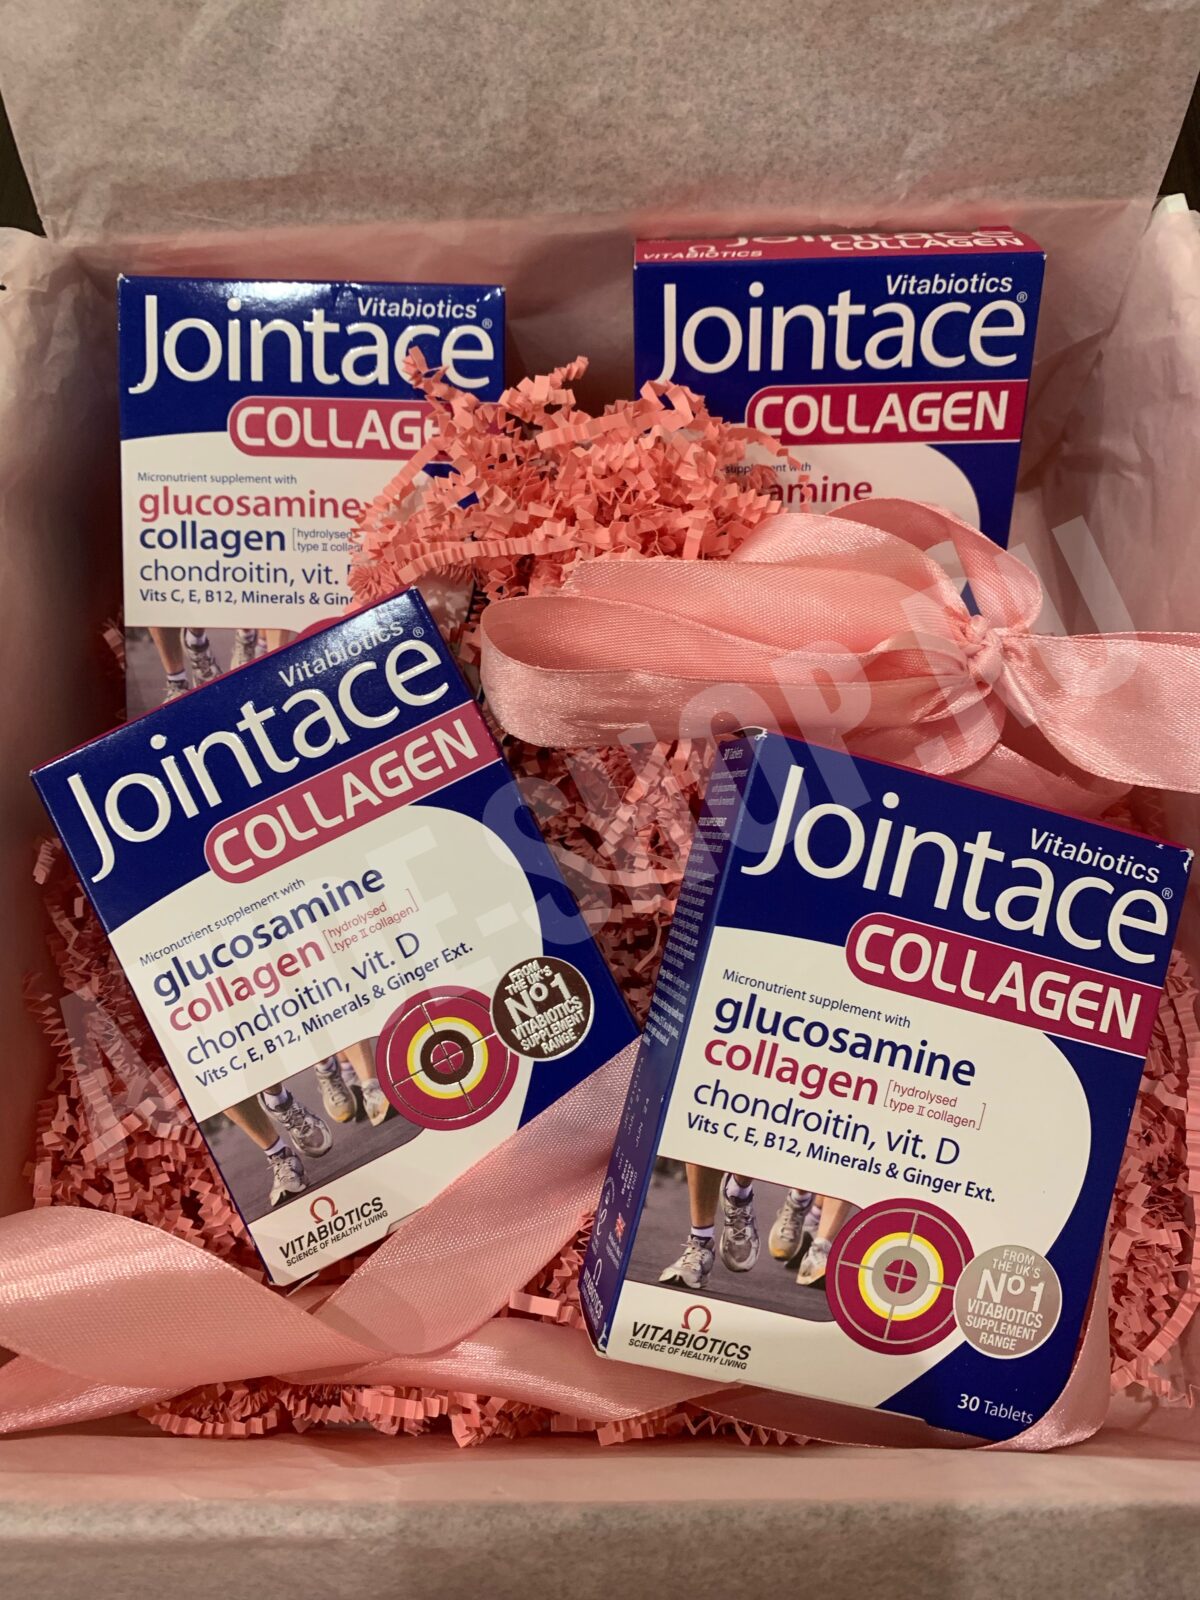 Jointace collagen